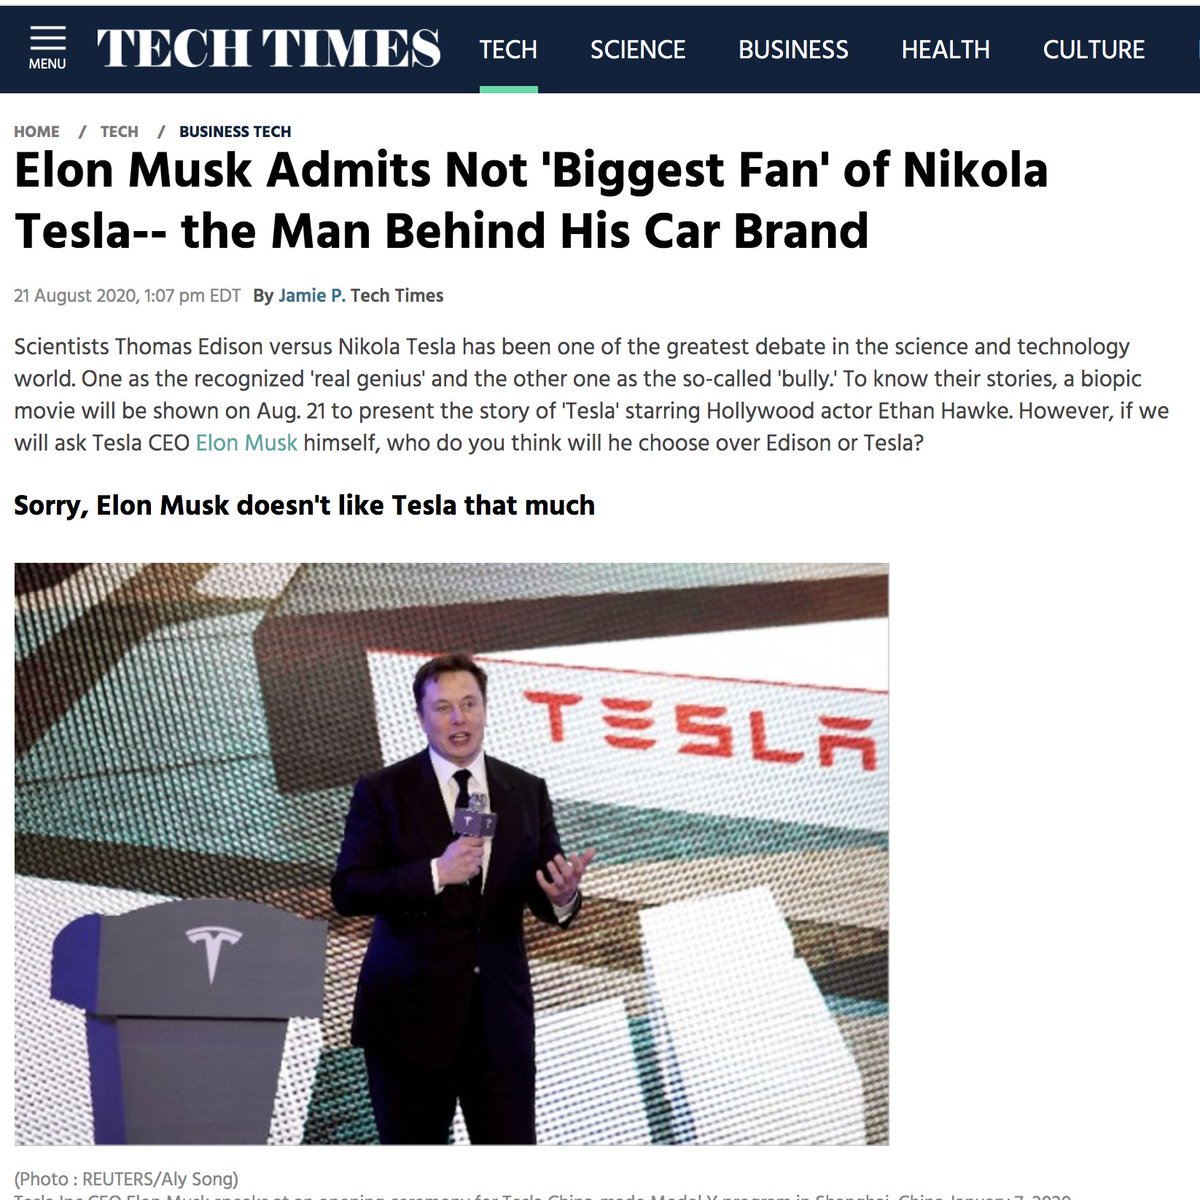 However, the Musk brand is confusing, as it seems to want to capture Tesla's essence while completely insulting and inverting it. Musk brands himself and profits with Tesla's image yet does not honor or acknowledge Tesla's actual methods & beliefs.